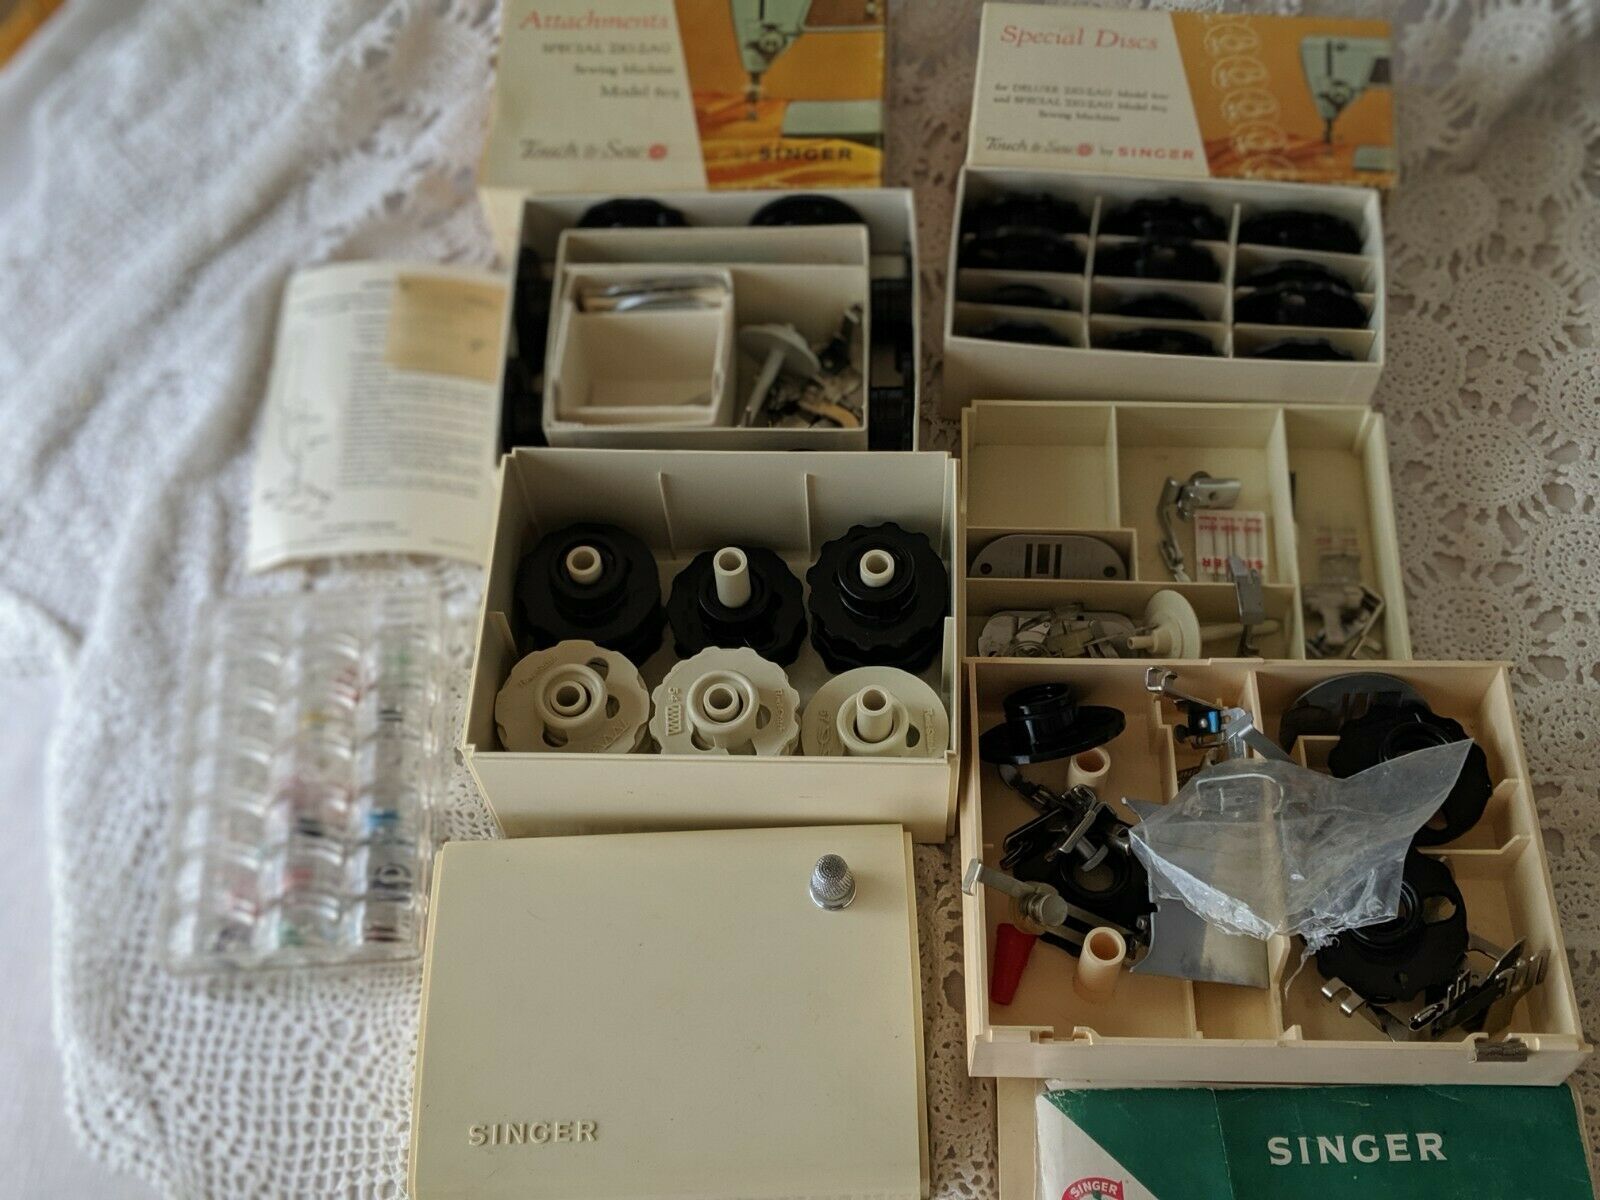 Singer Sewing Machine Attachments Mixed Lot Vintage - $43.64